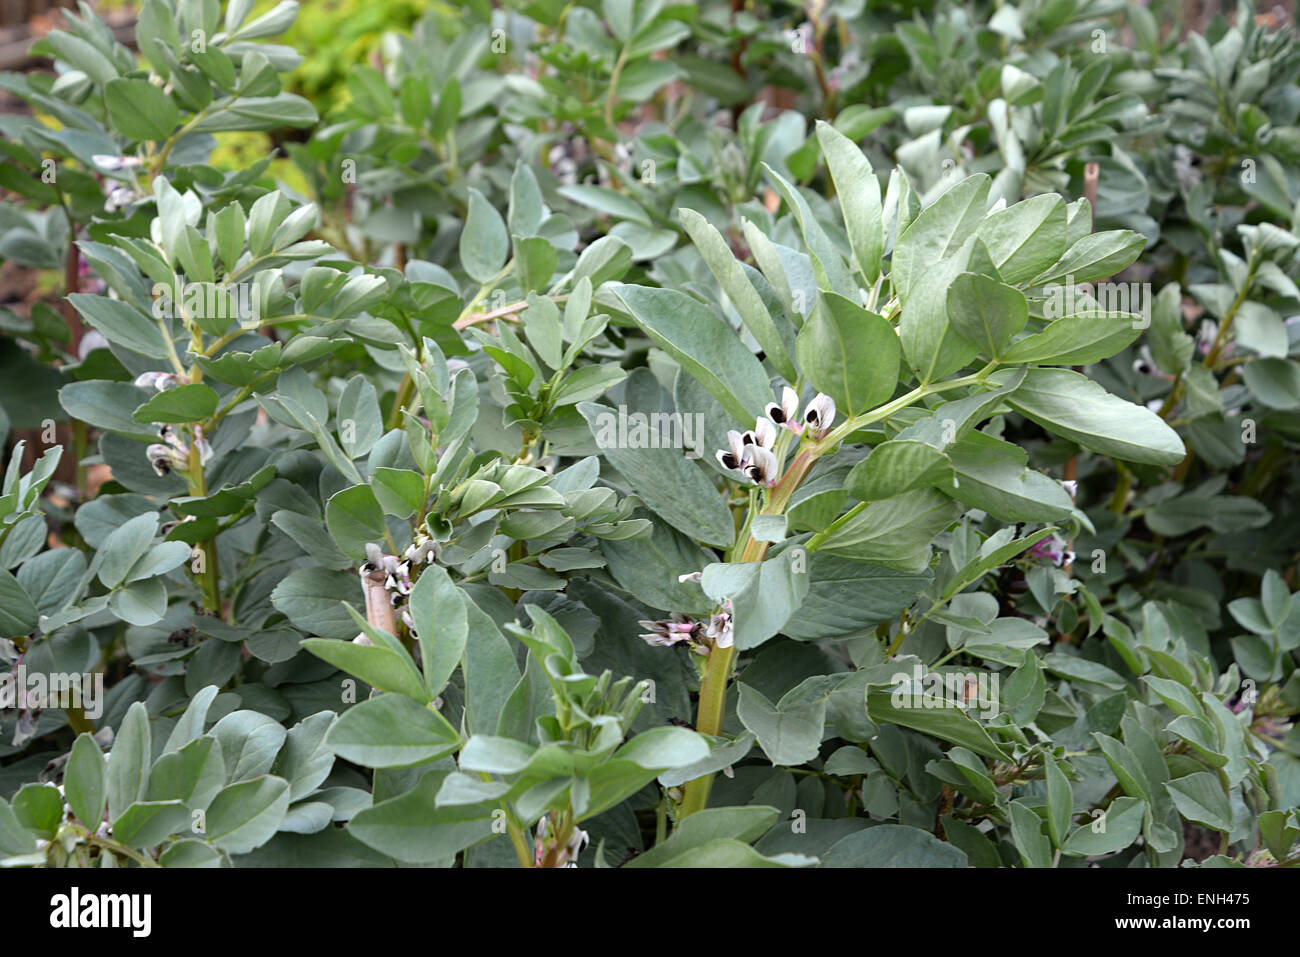 Broad bean plants with edible flowers growing in Radlett Allotments, Hertfordshire. Stock Photo